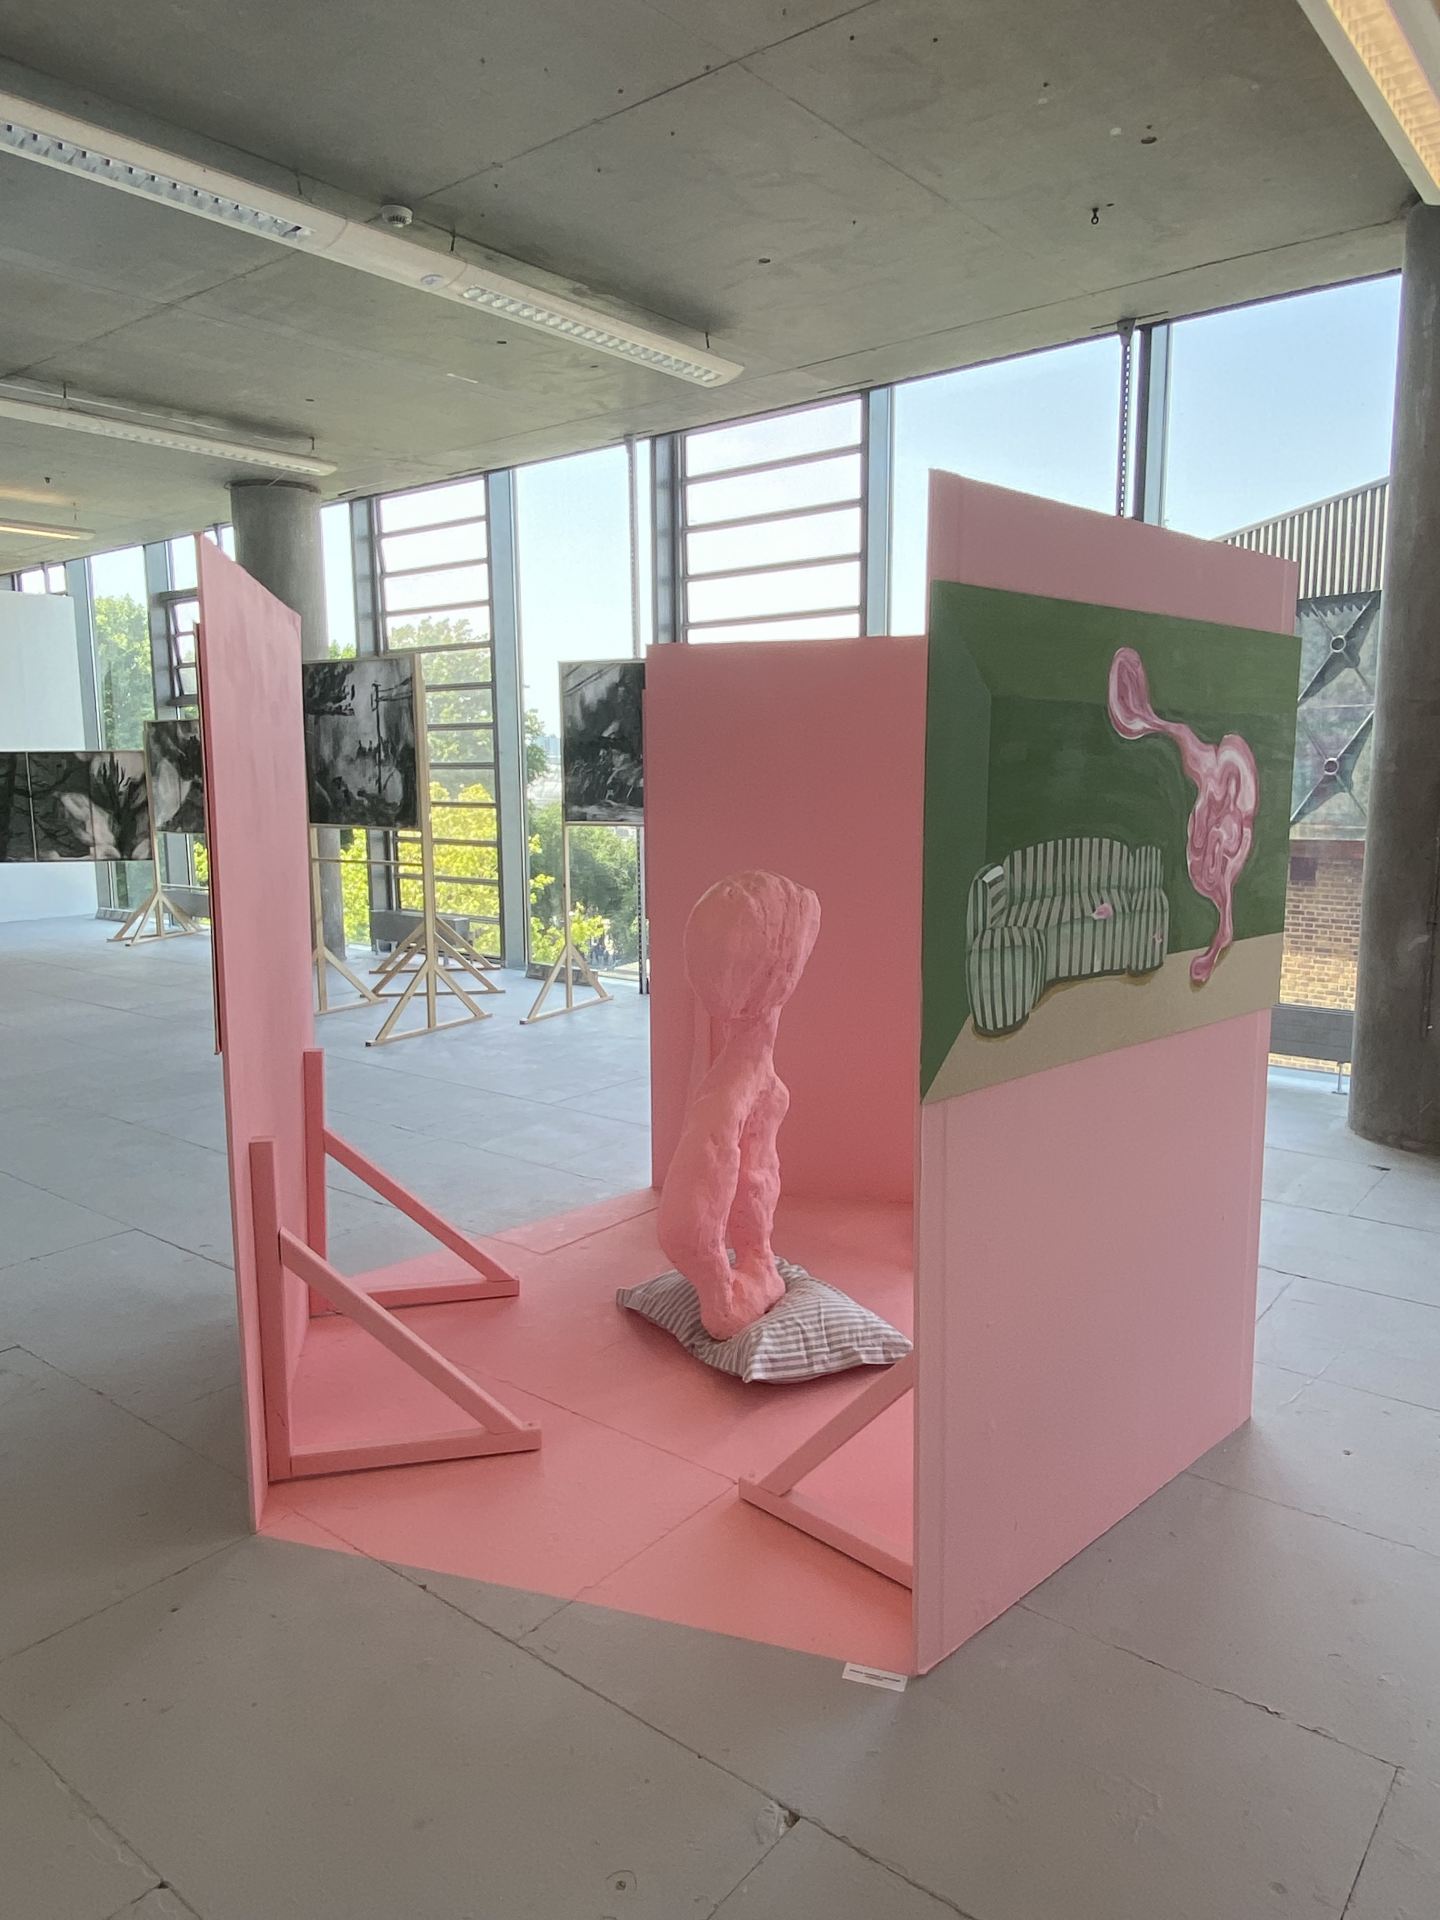 A pink sculpture stood between three upright pink boards.